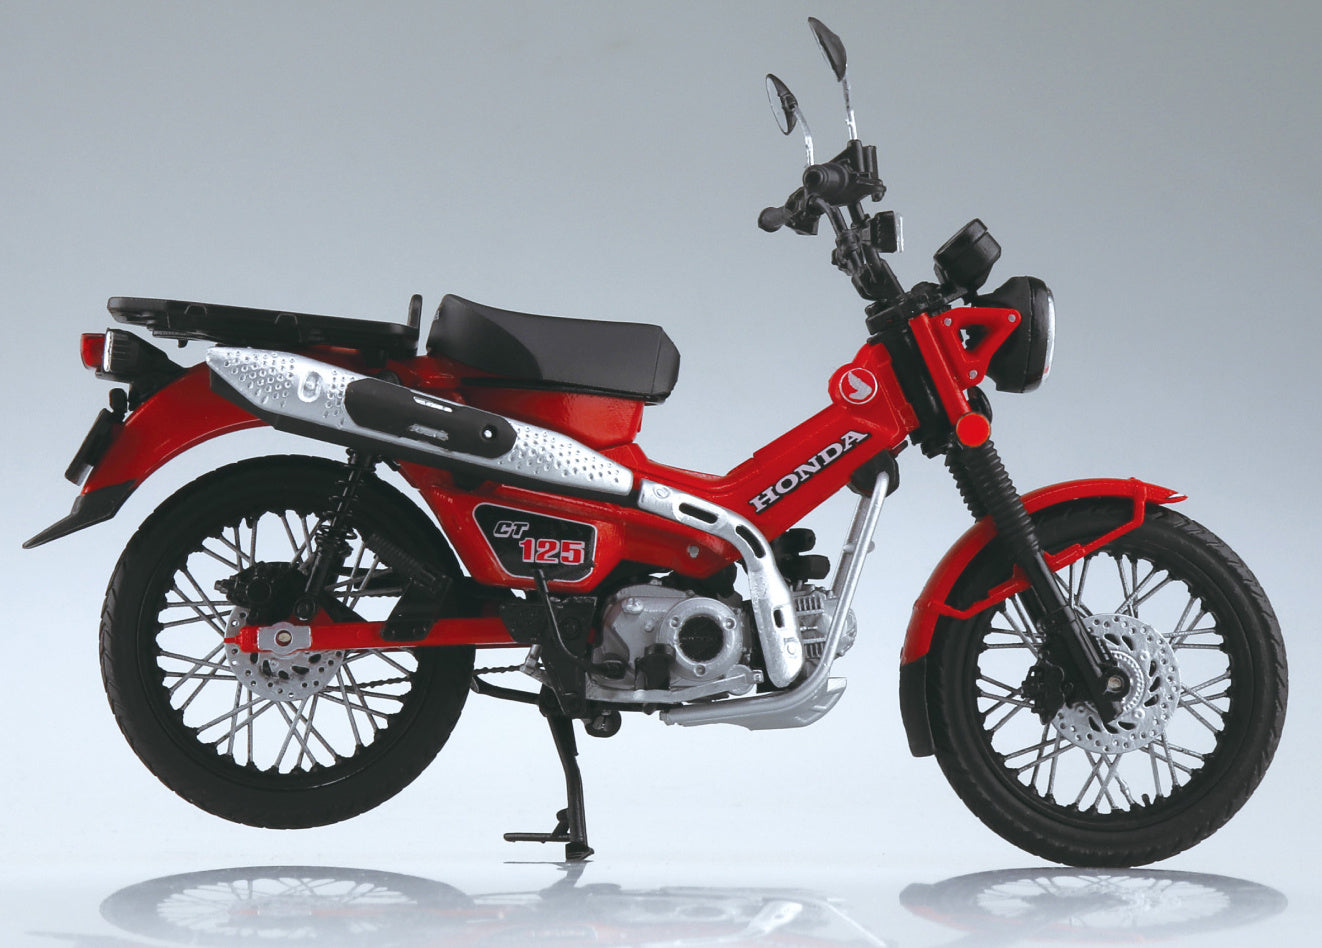 Aoshima - Diecast Motorcycle - Honda CT125 Hunter Cub (Glowing Red) Model Kit (1/12 Scale) - Marvelous Toys